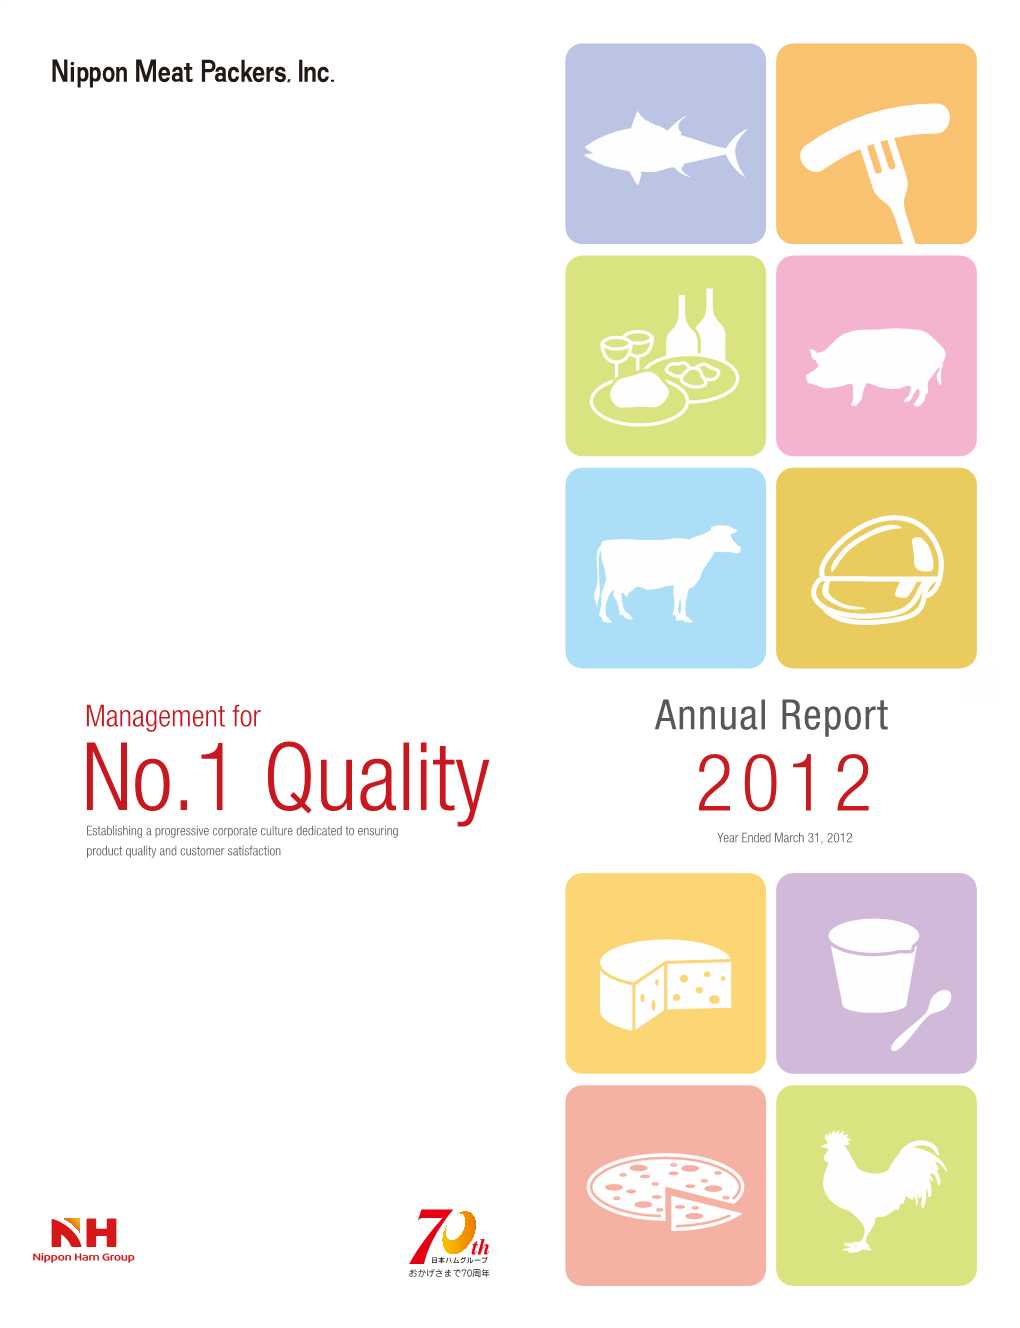 Annual Report 2012 Issued